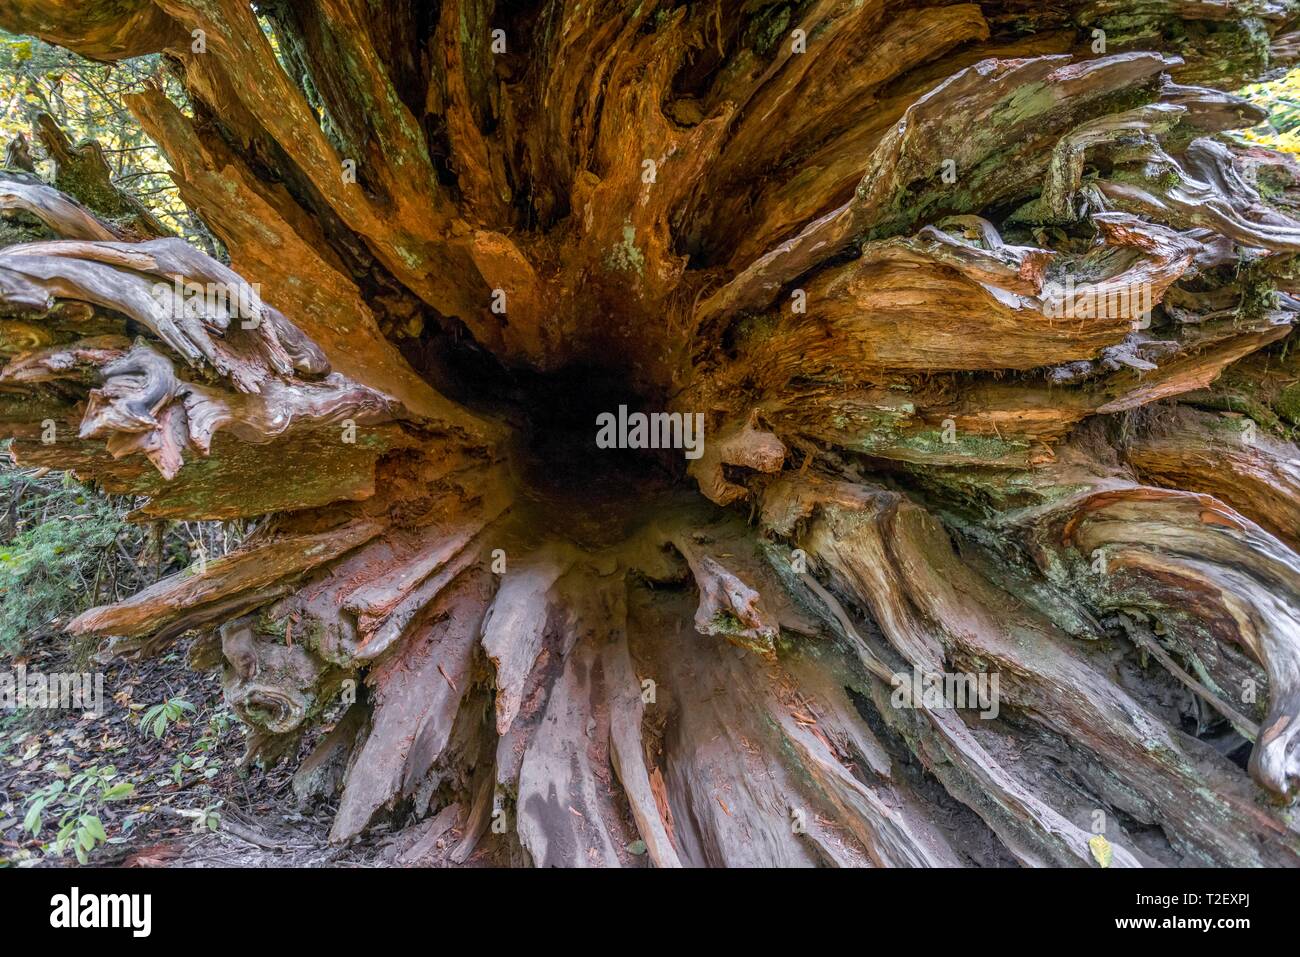 Roots of a fallen Western Red Cedar (Thuja gigantea) in a forest, Grove of the Patriarchs Trail, Mount Rainier National Park, Washington, USA Stock Photo